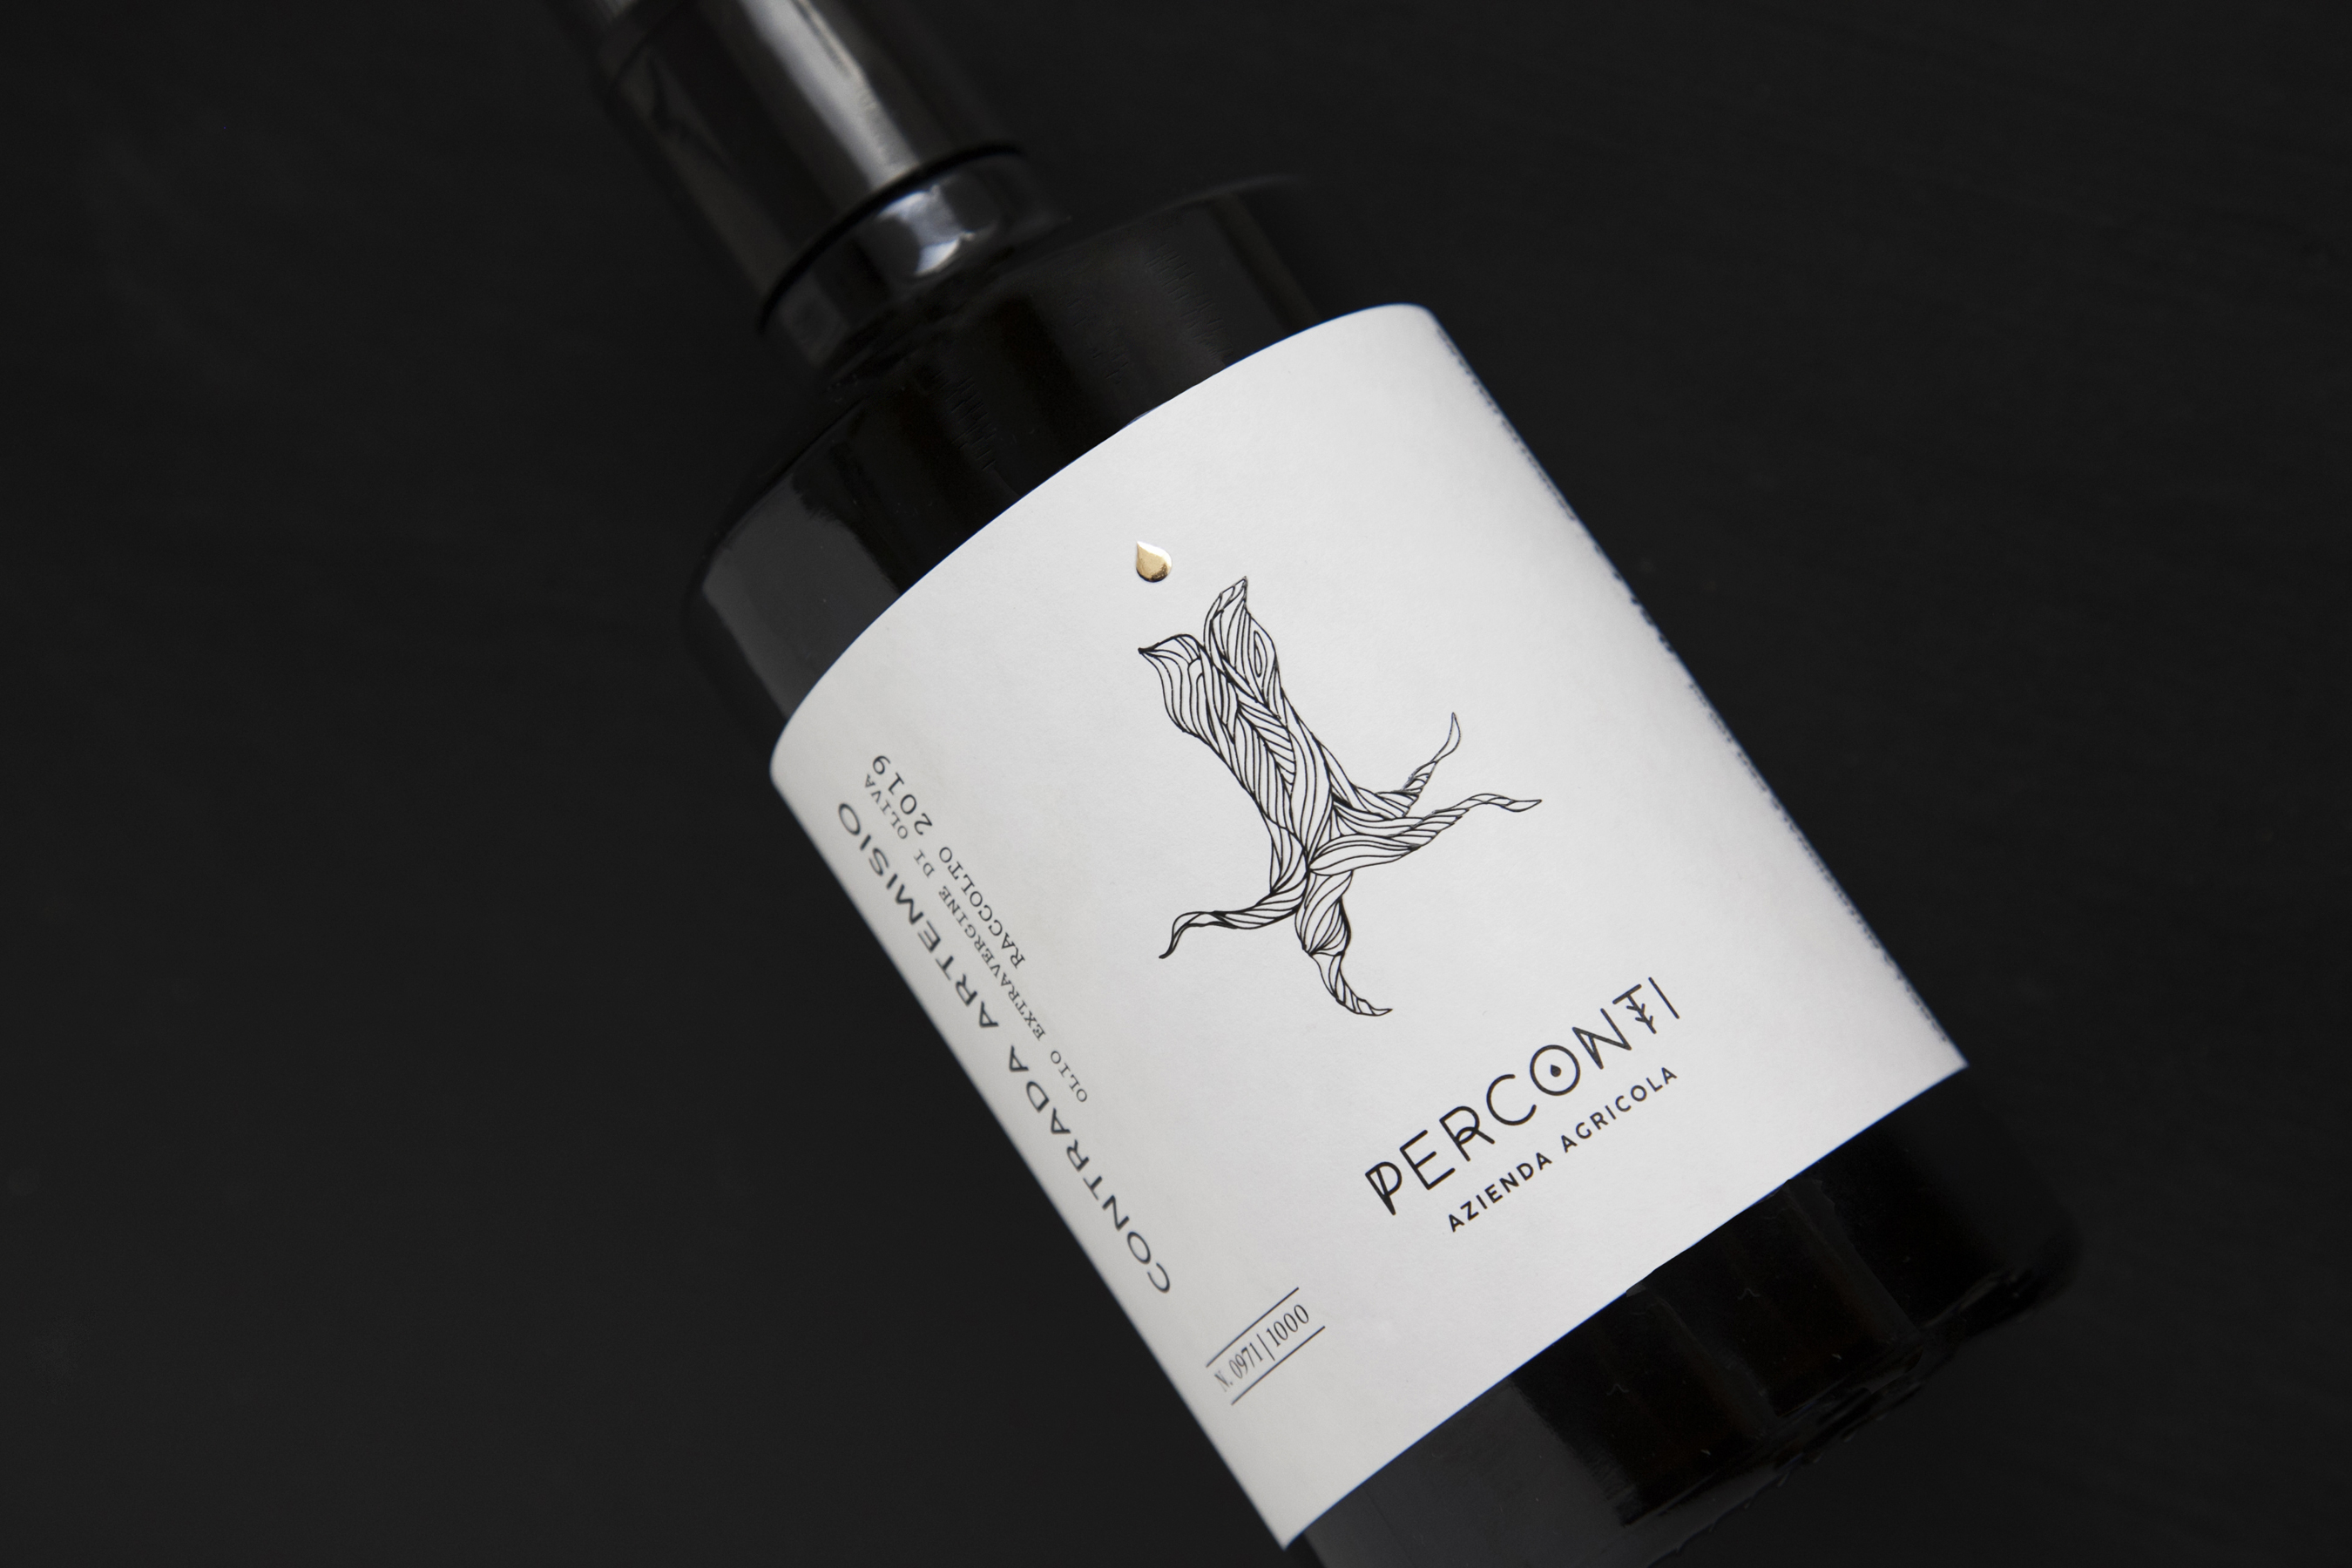 Auca Design Creates New Perconti Limited Extra Virgin Olive Oil Packaging